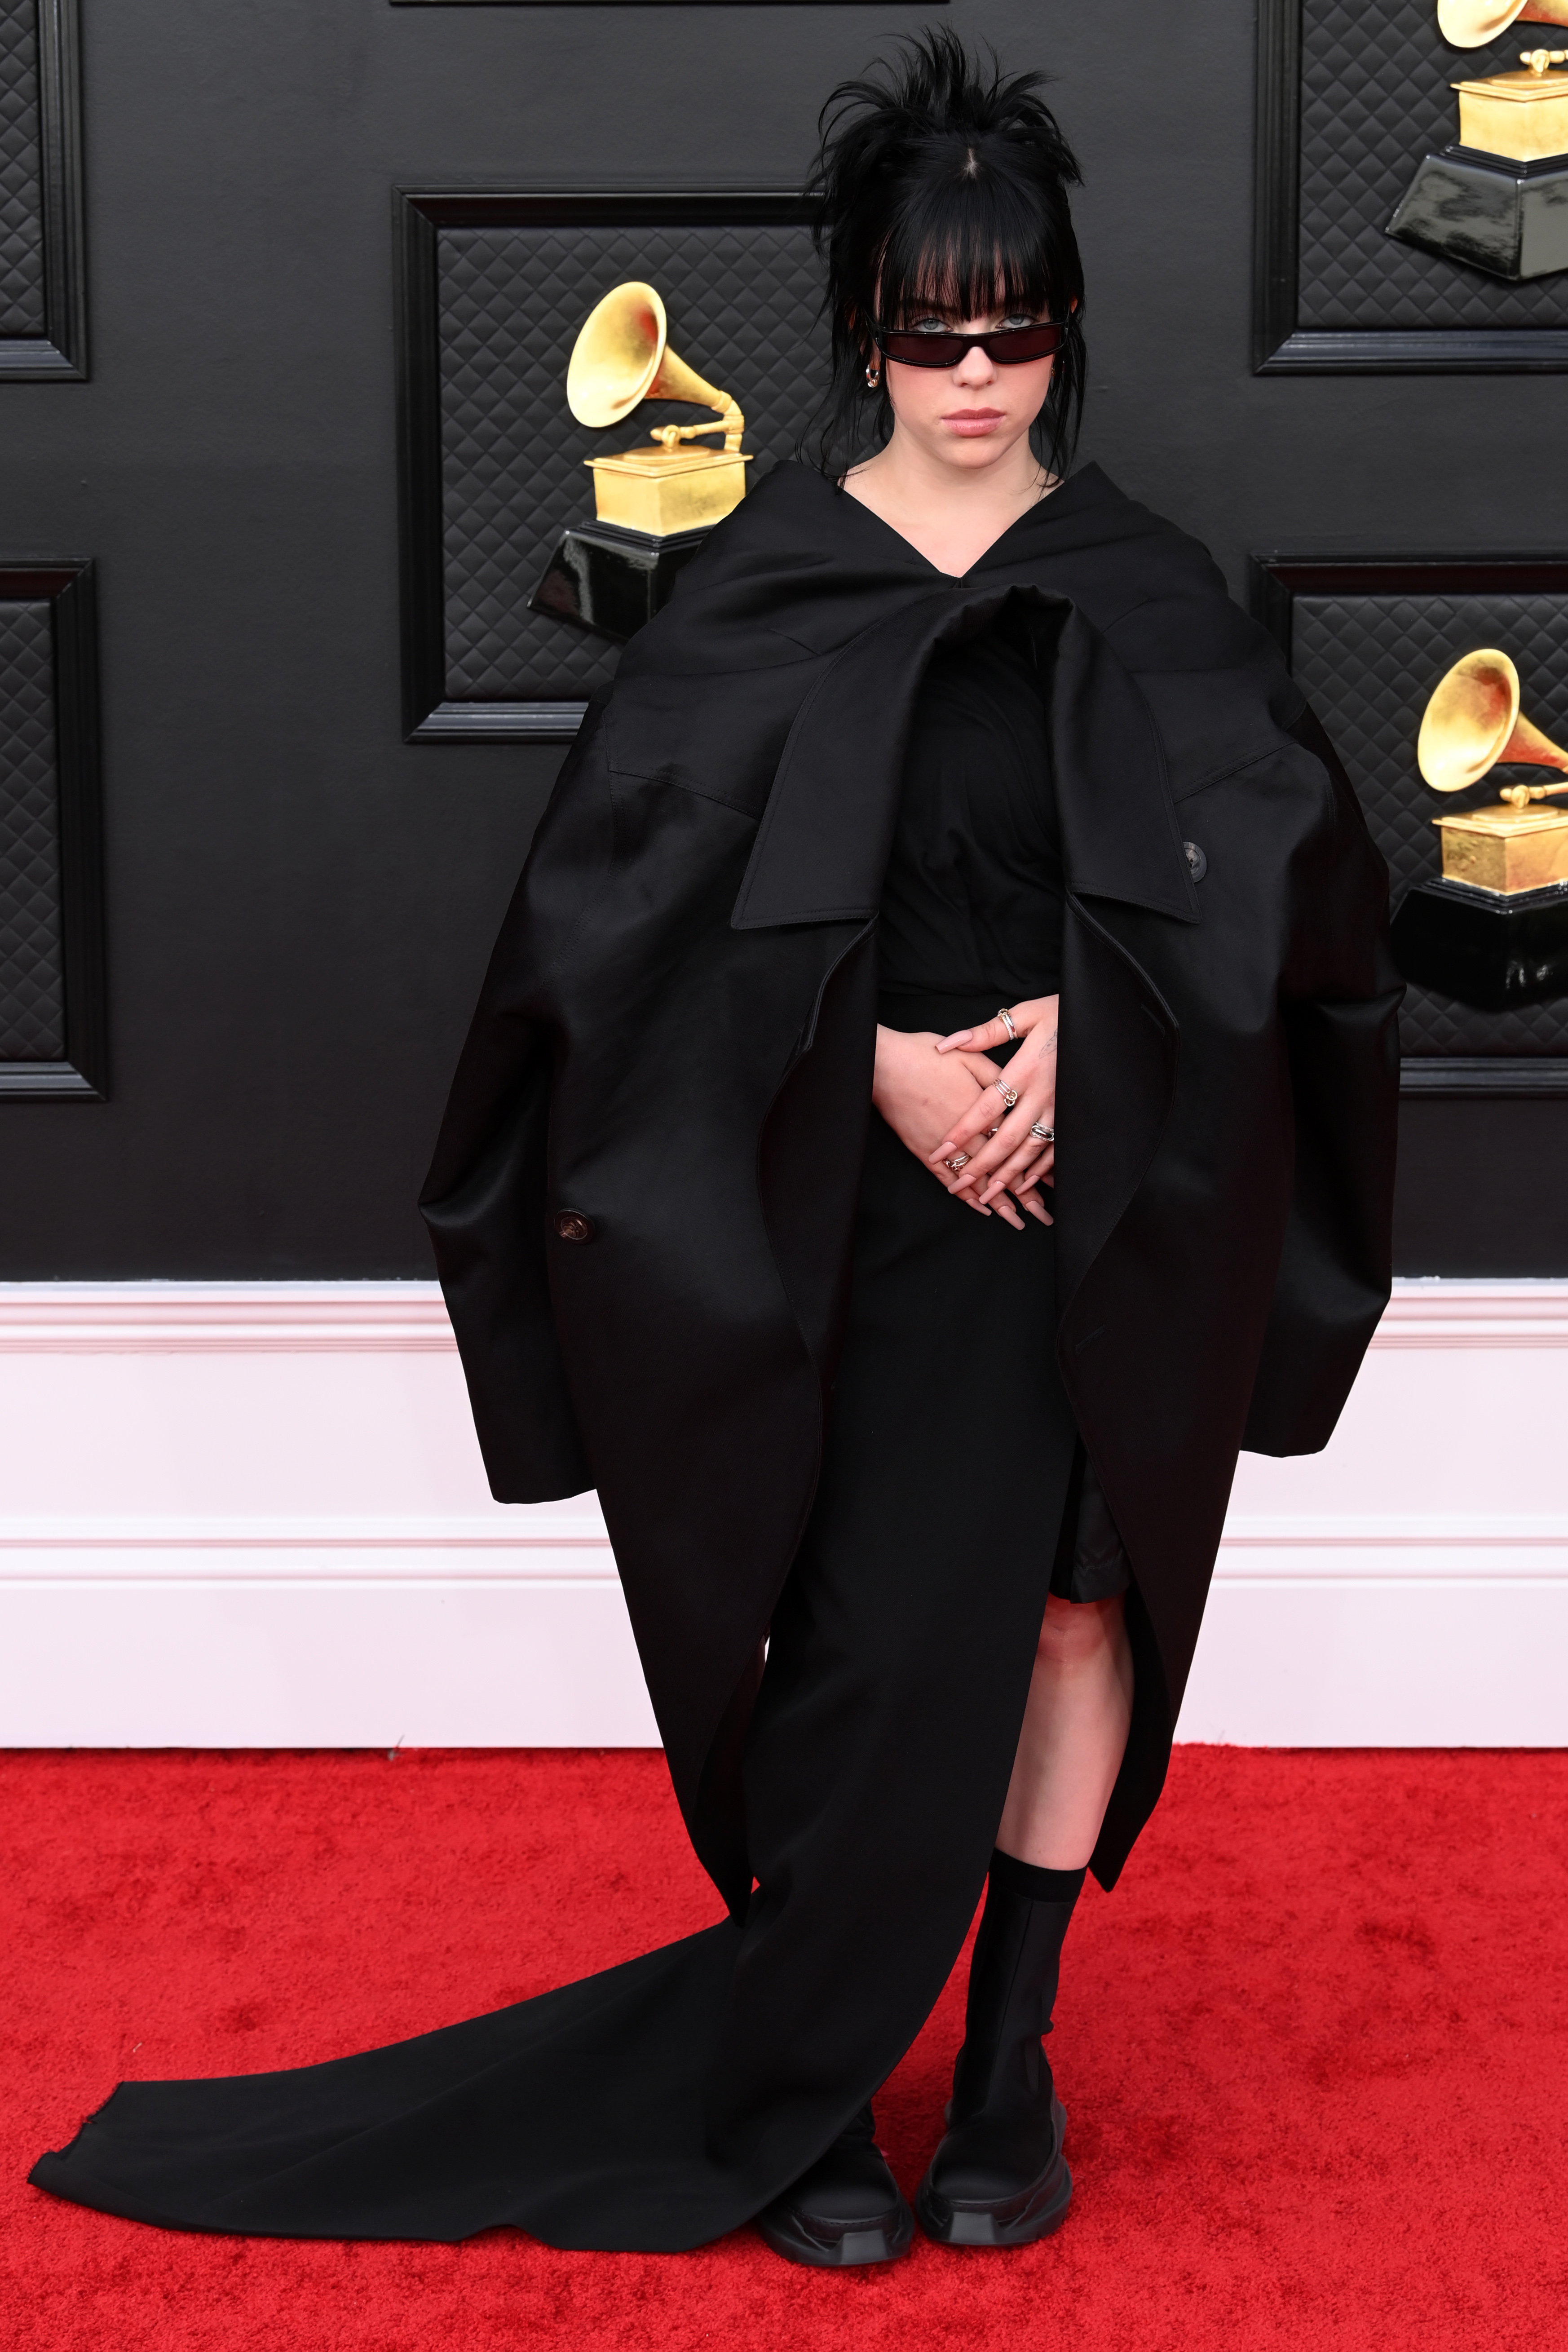 Grammys 2022: Celebrity Couples on the Red Carpet [PHOTOS]